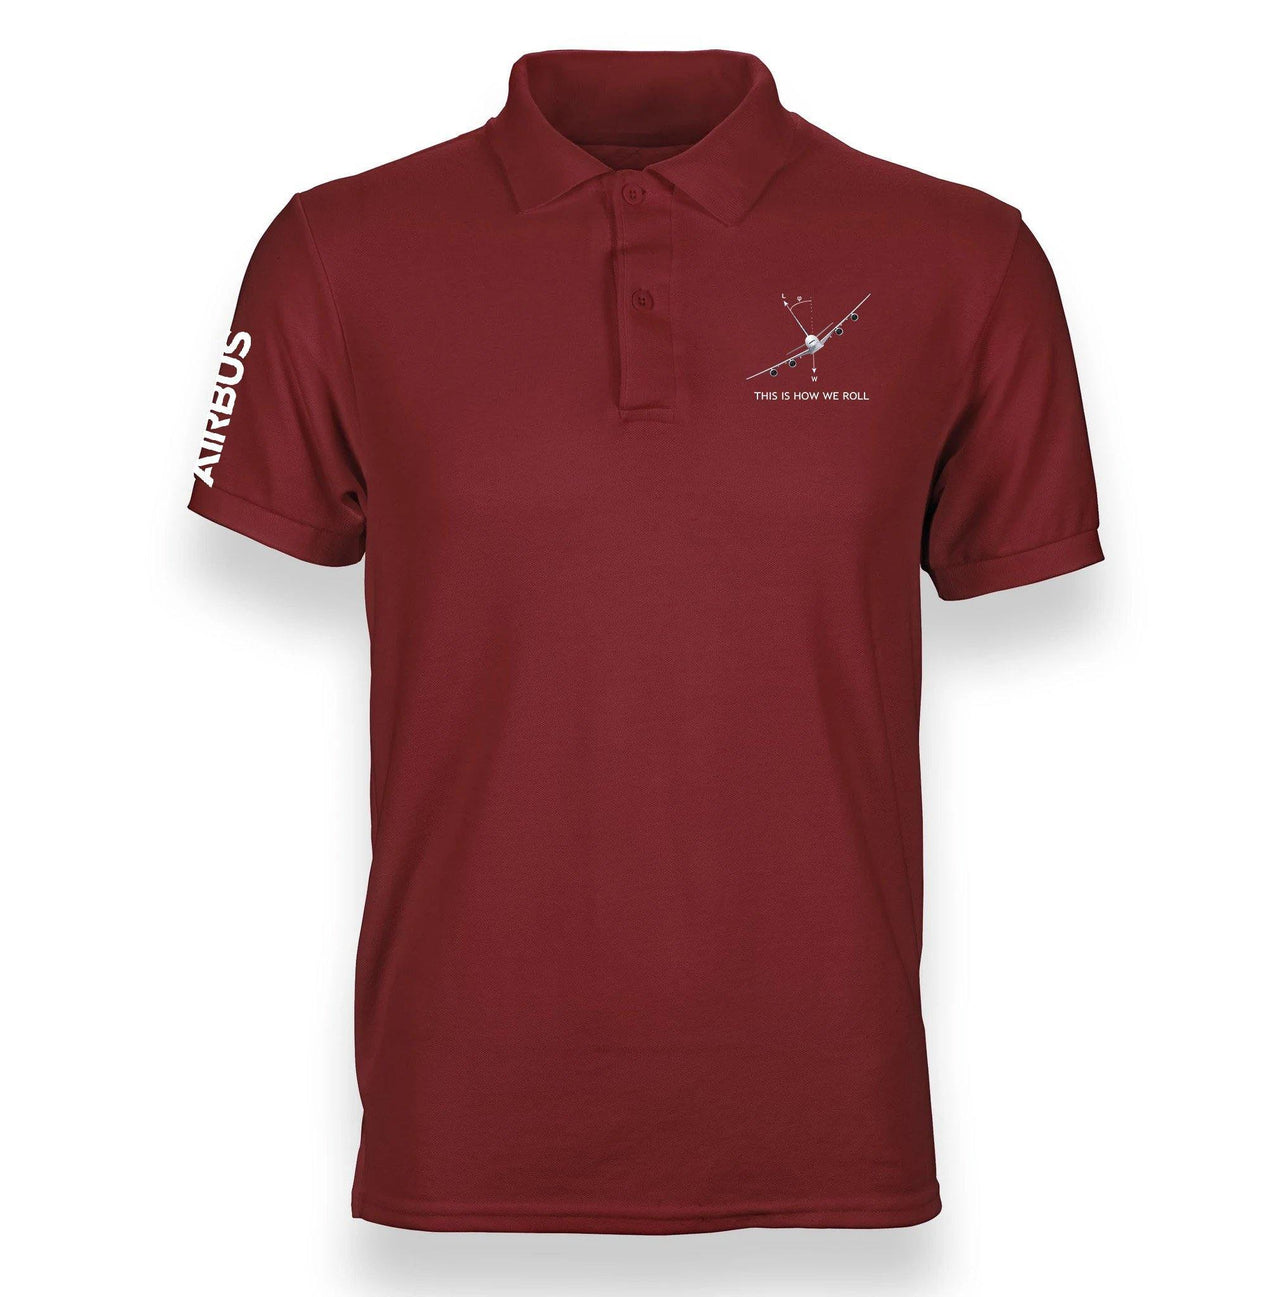 THIS IS HOW WE ROLL AIRBUS A380 DESIGNED POLO SHIRT THE AV8R